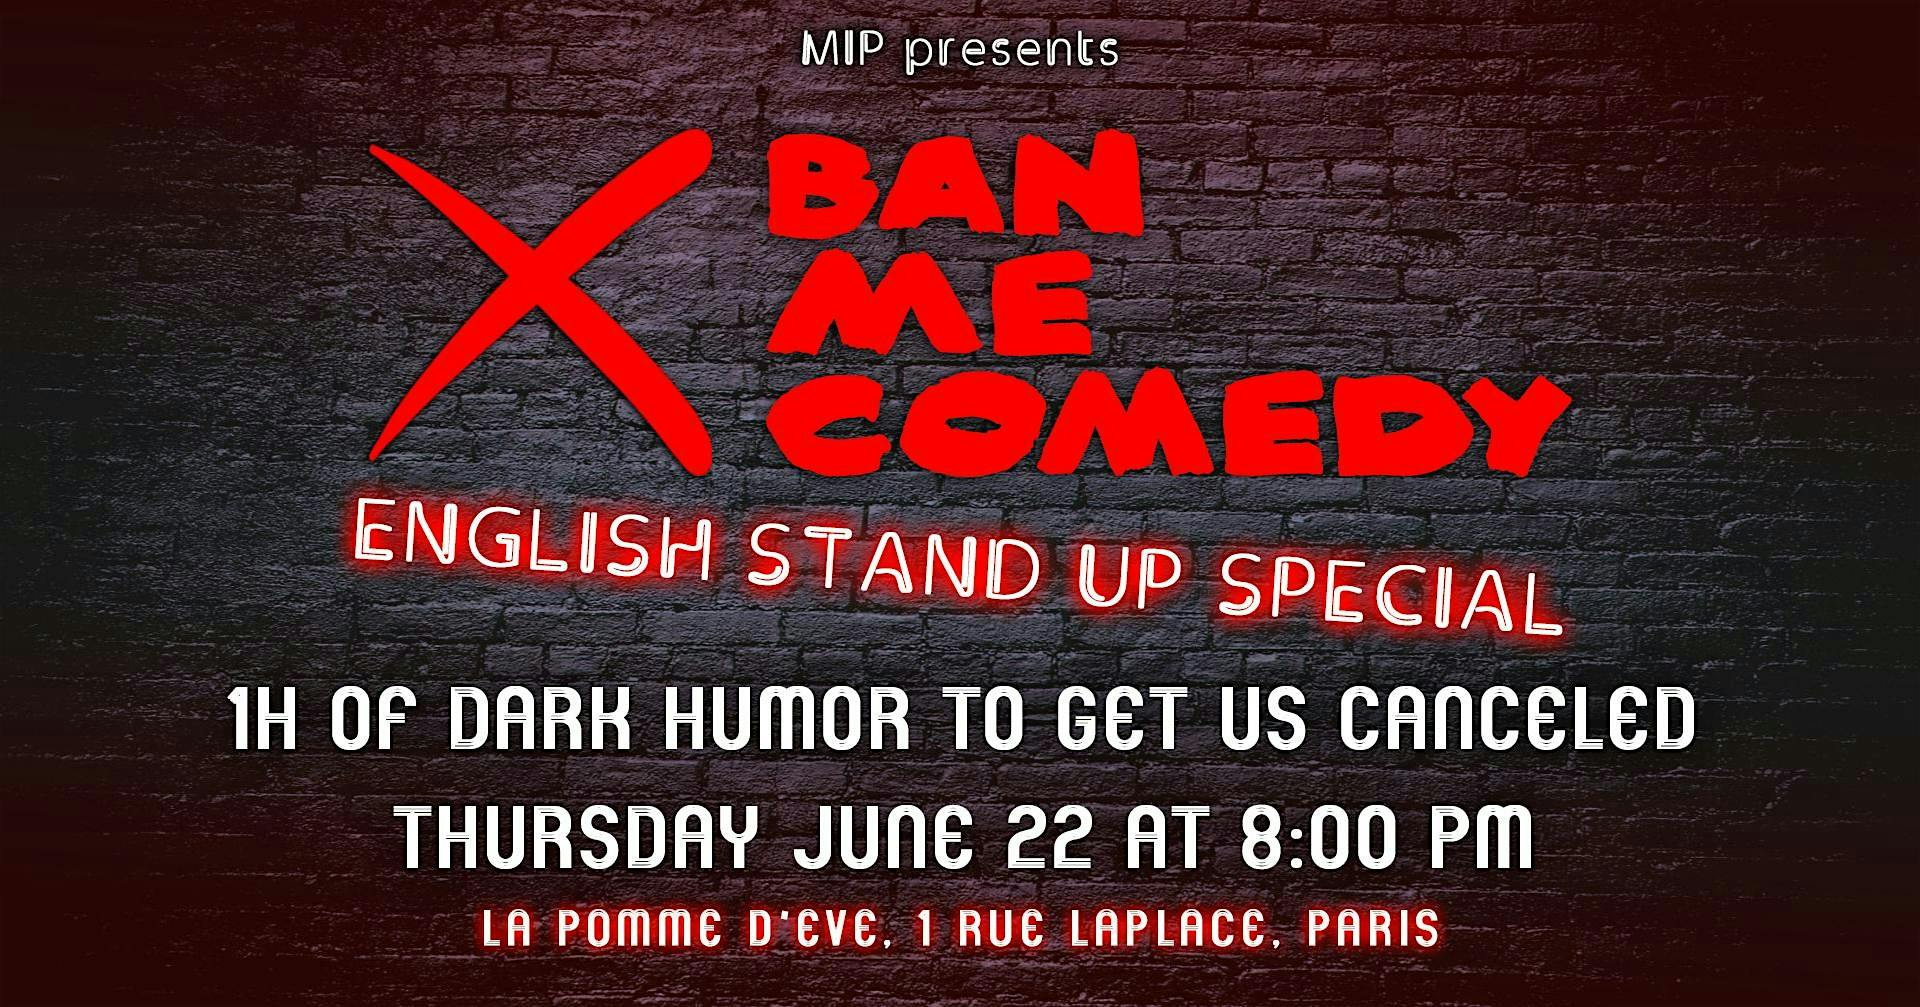 Ban Me Comedy | English Stand-Up Show in Paris logo